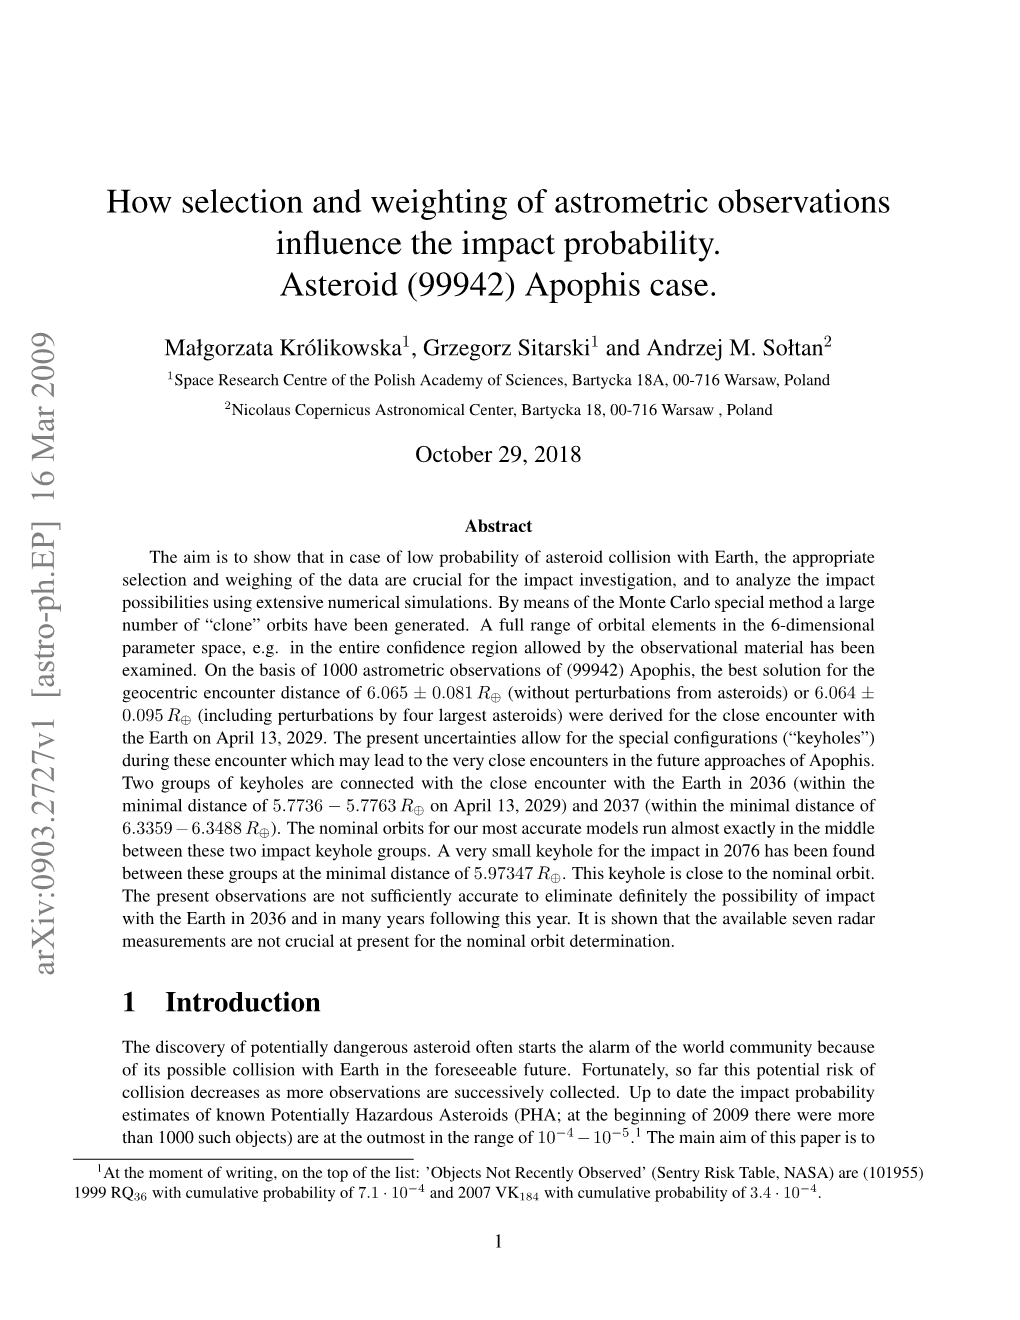 How Selection and Weighting of Astrometric Observations Influence